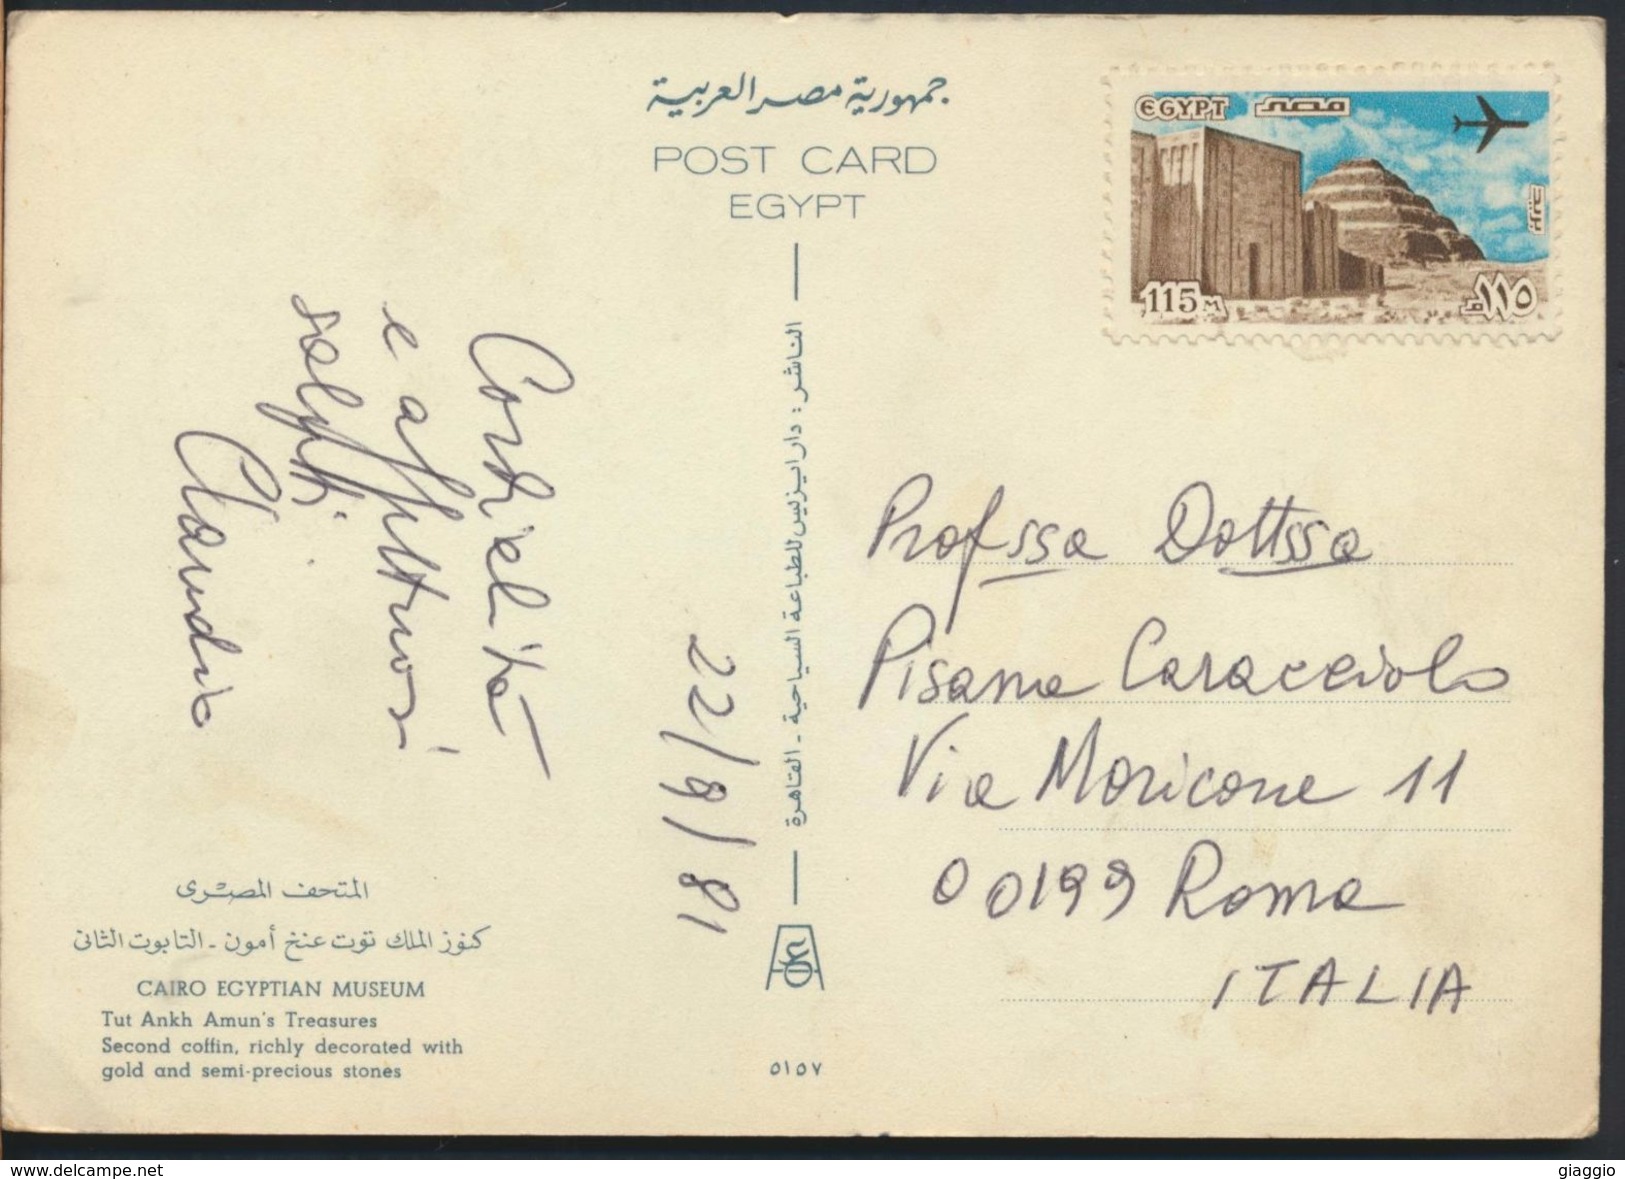 °°° 6716 - EGYPT - CAIRO - EGYPTIAN MUSEUM - 1981 With Stamps °°° - Musées